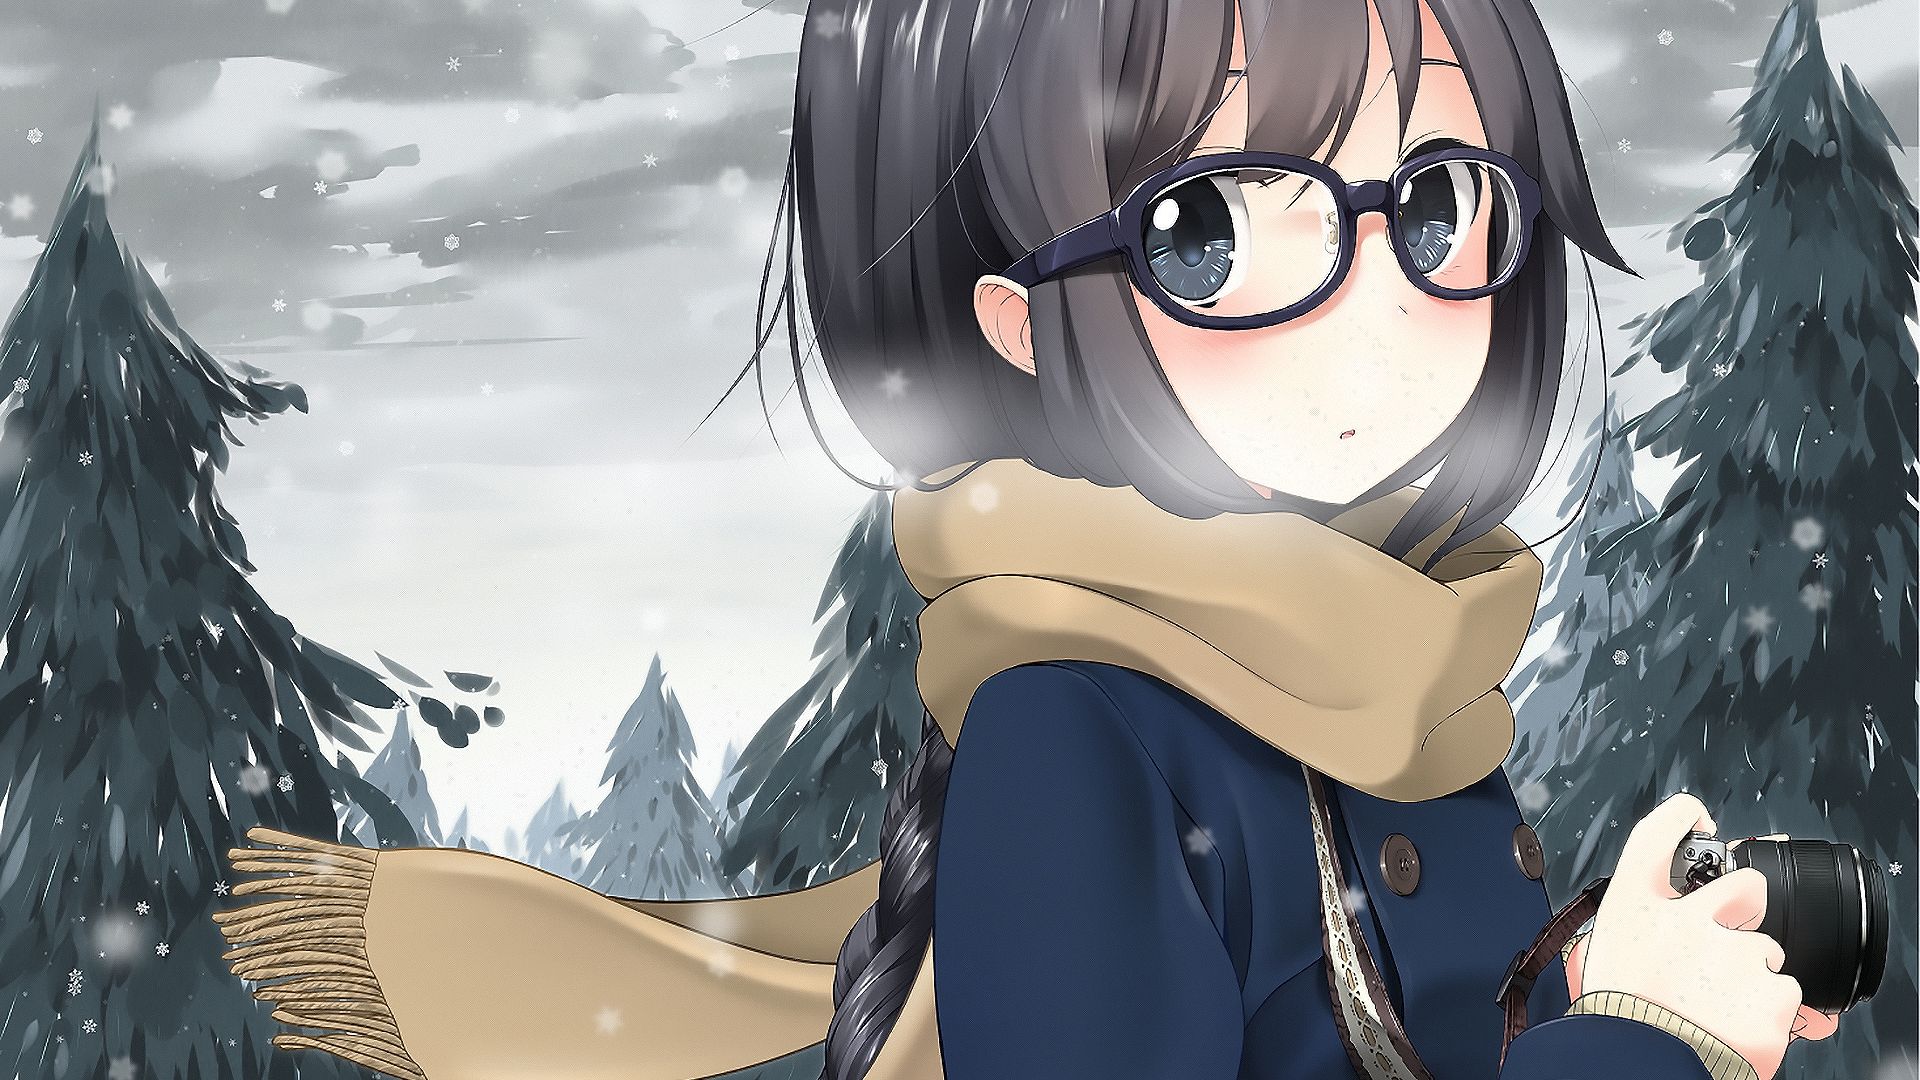 Desktop Wallpaper Glasses, Cute, Anime Girl, Photographer, Outdoor, Hd  Image, Picture, Background, 9b8cf0